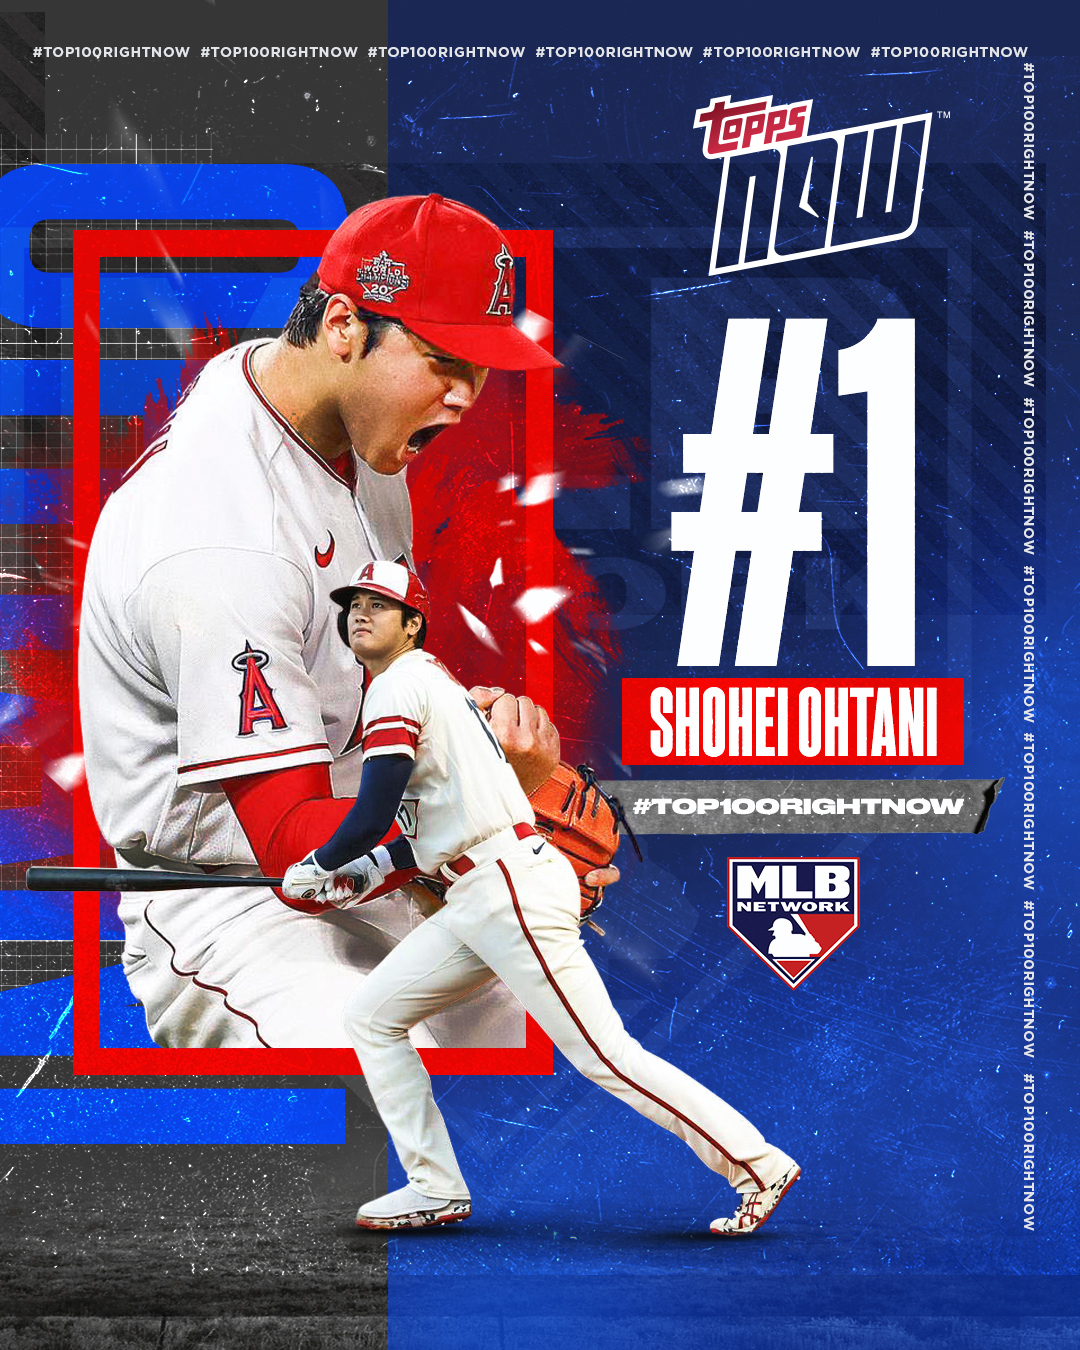 MLB on X: For the second year in a row, Shohei Ohtani is MLB